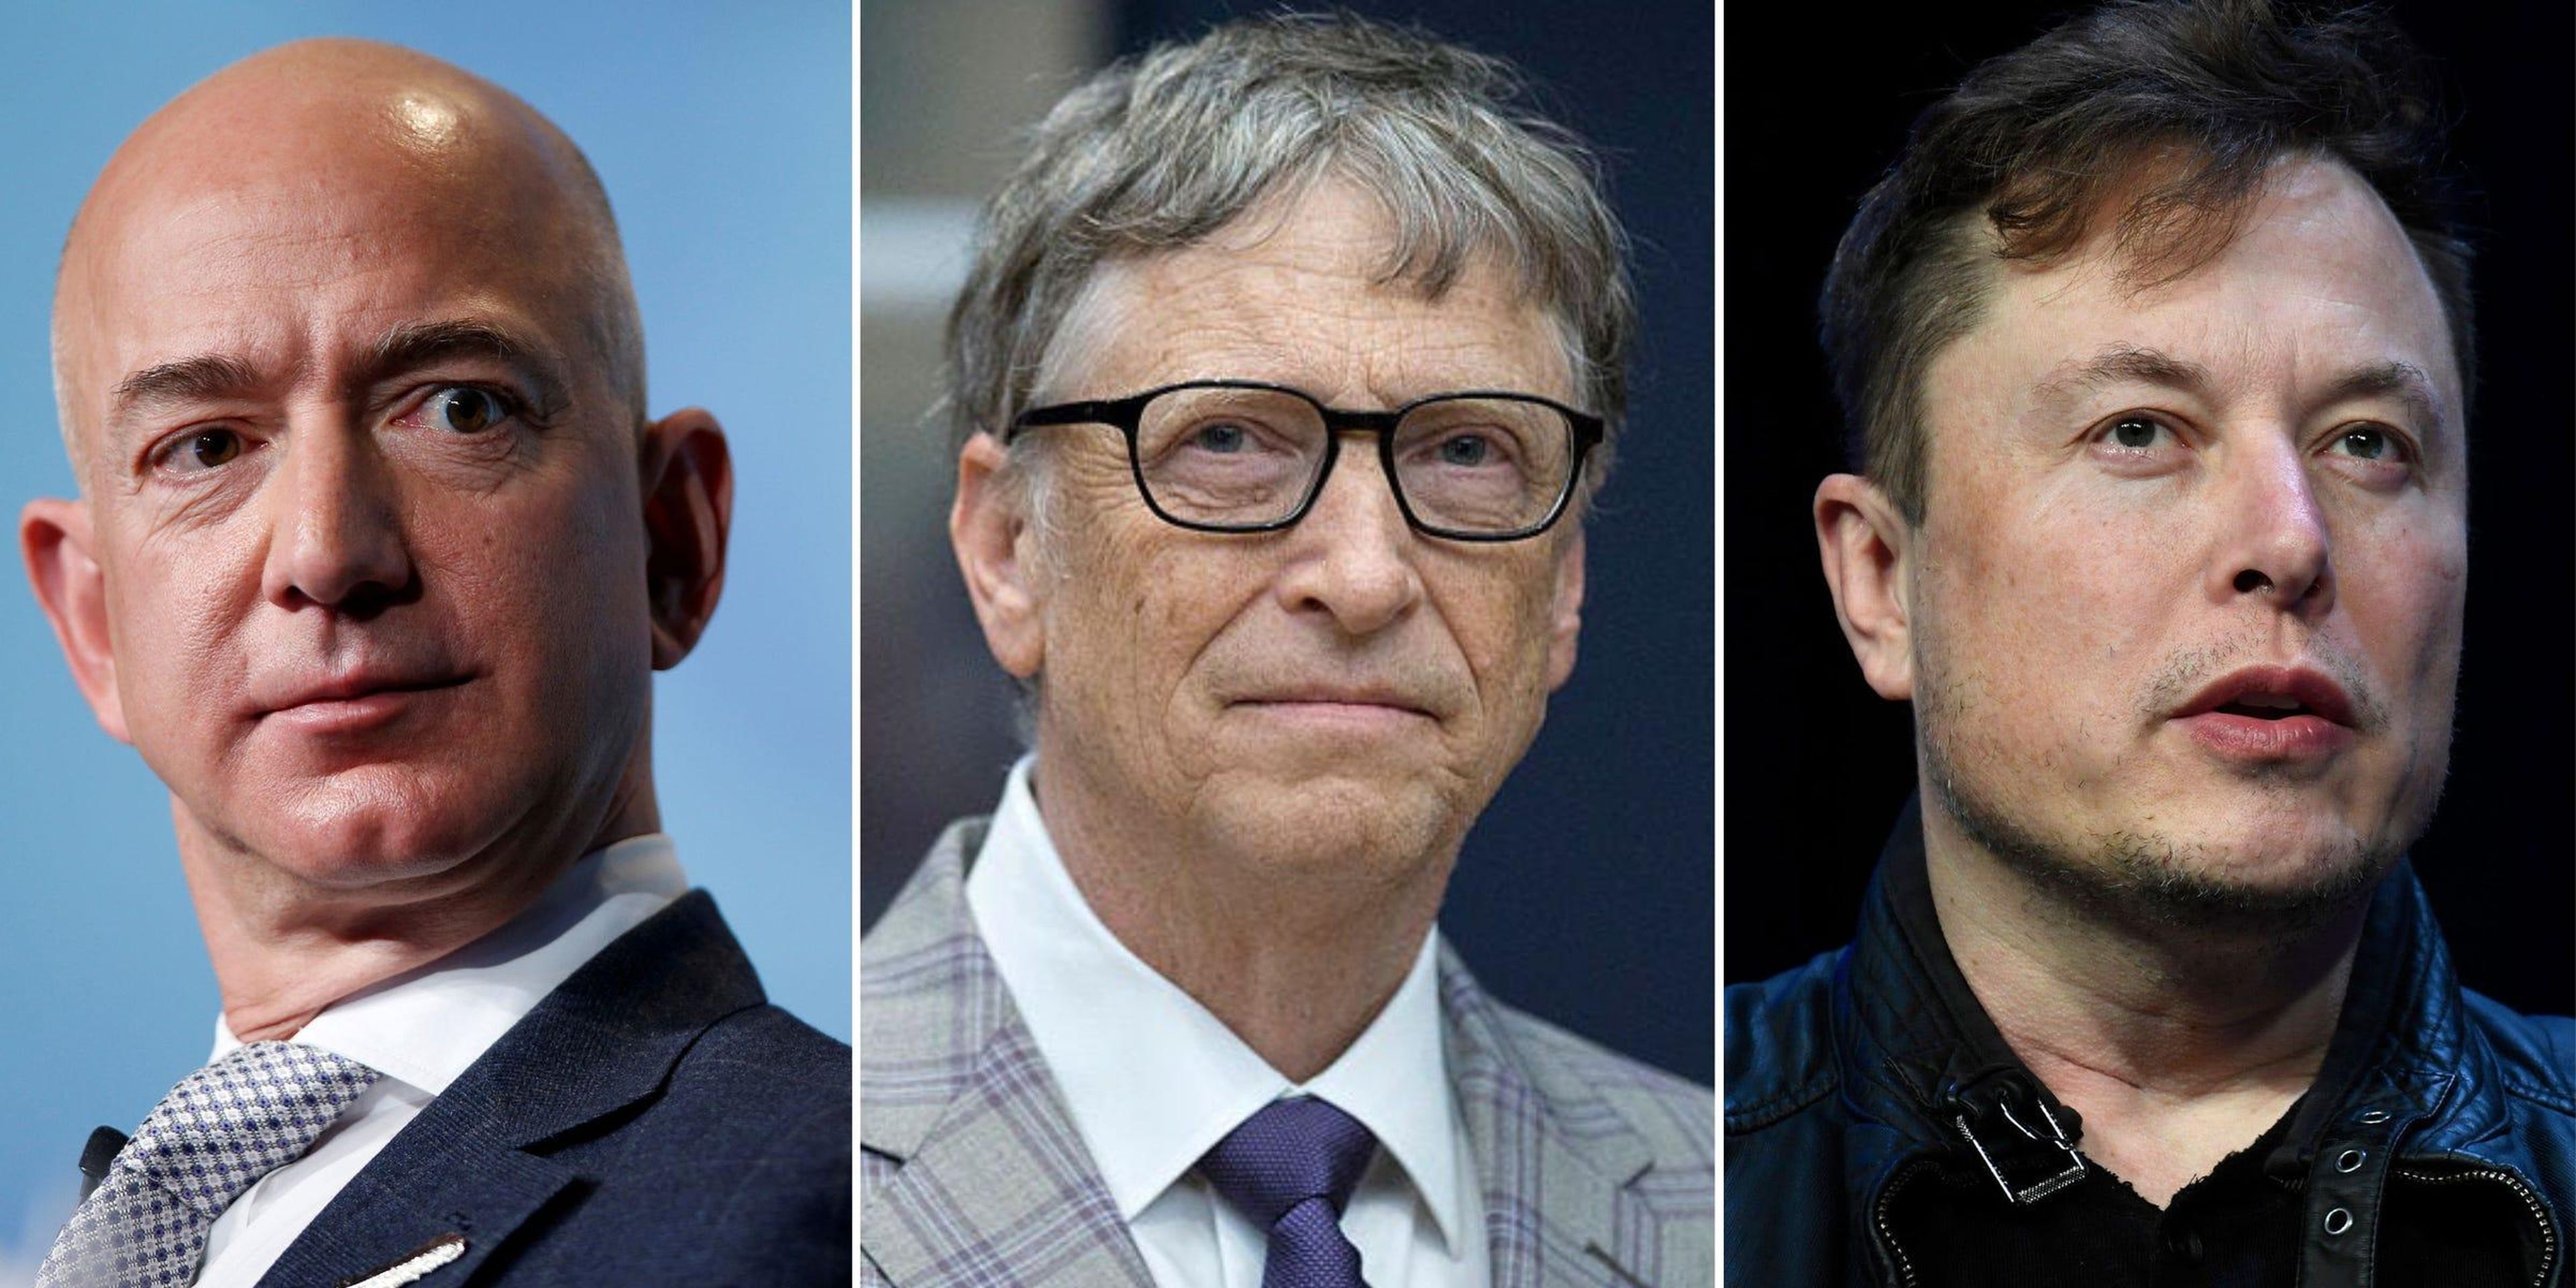 Bill Gates and Mark Zuckerberg saw their net worths take a hit on Monday — but Bezos added to his wealth, with Amazon stock closing up.